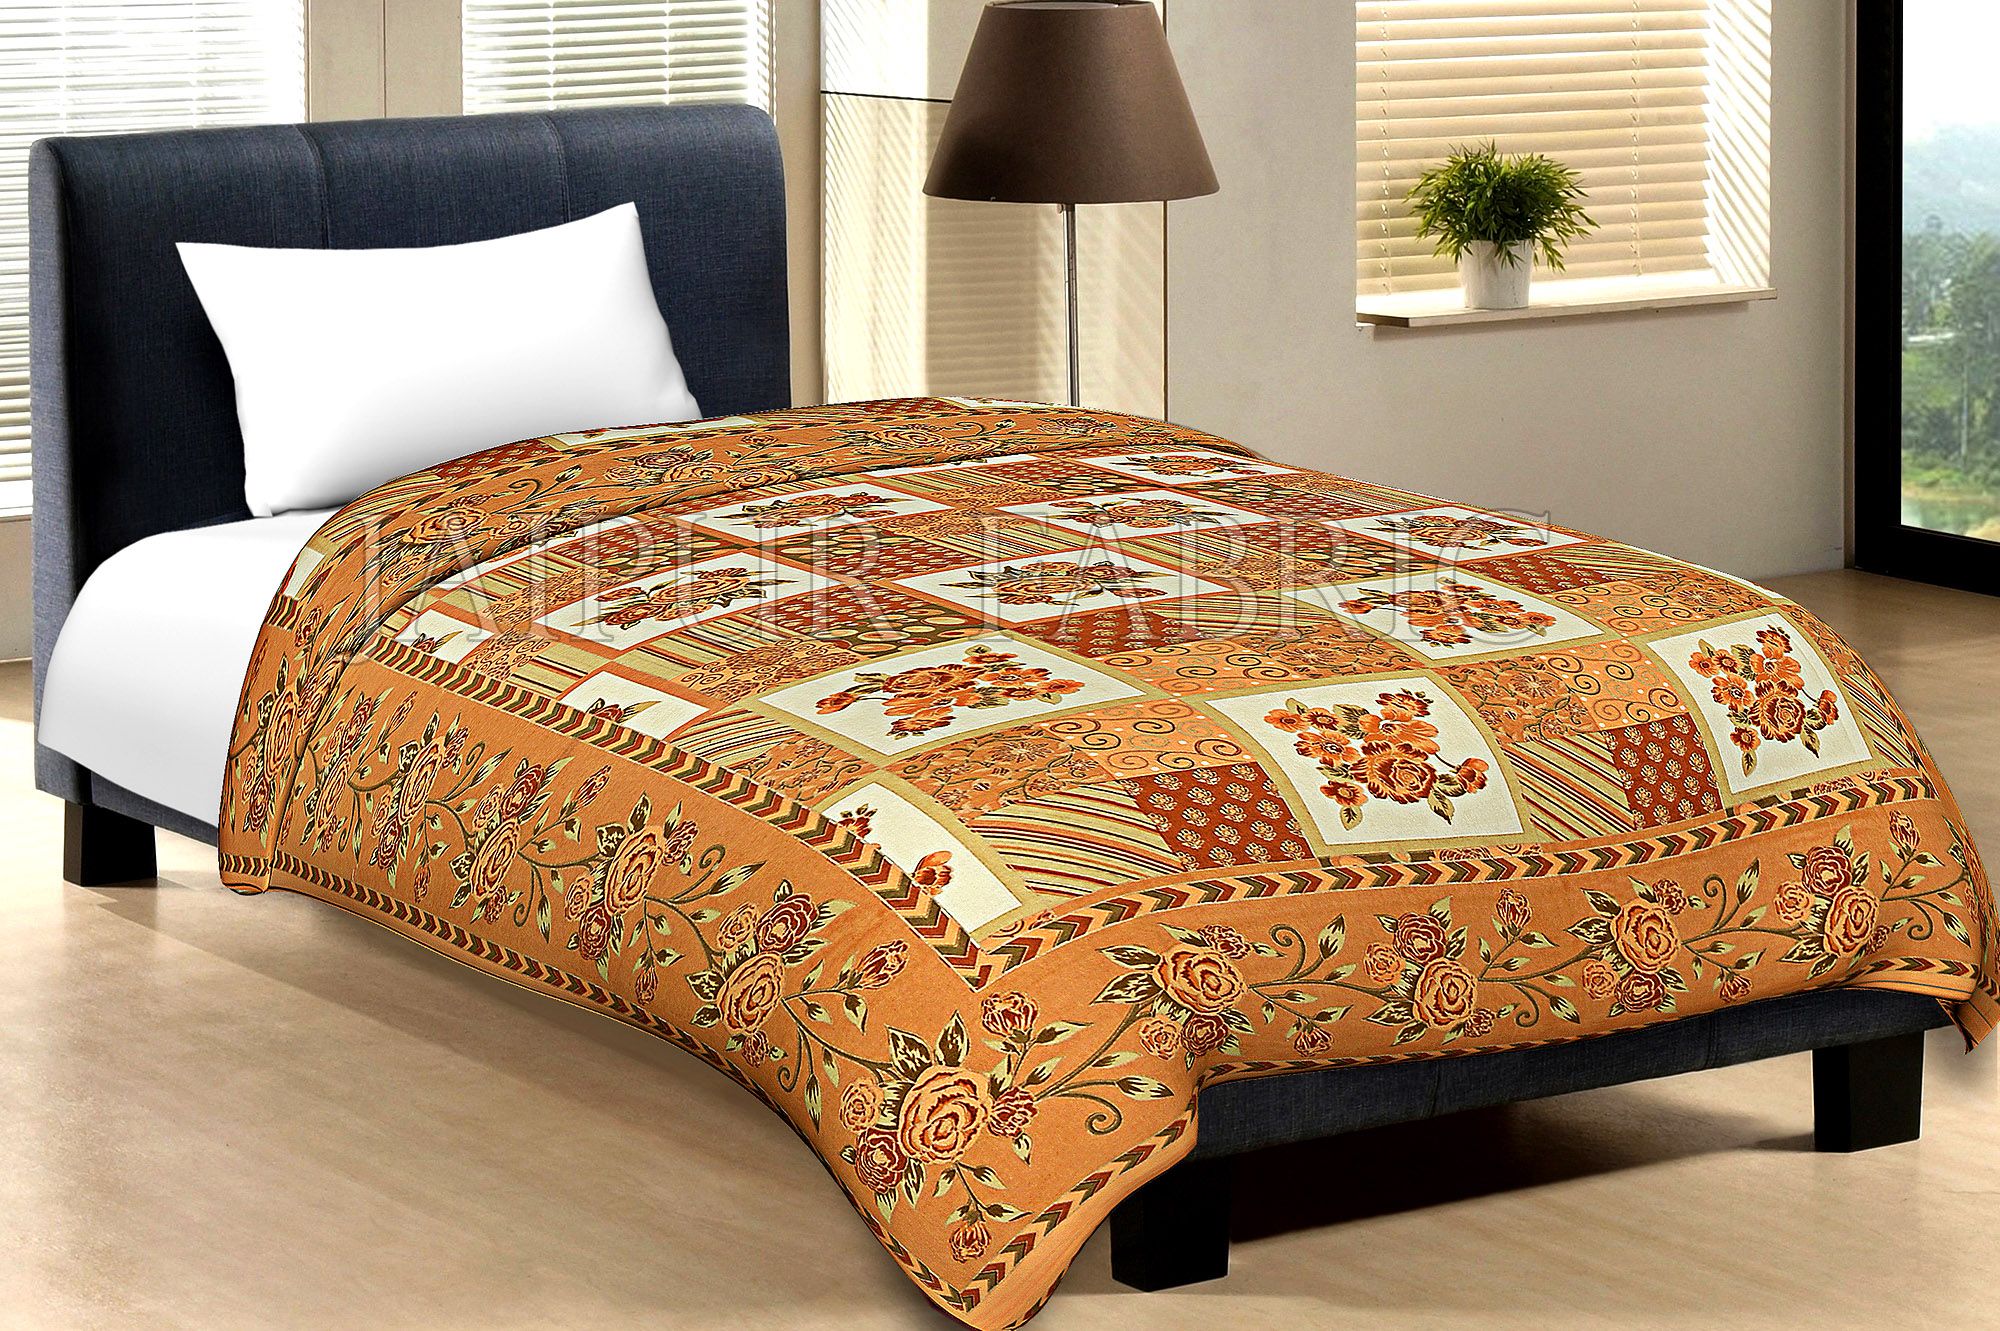 Musterd Border Cream Base Flower And Check With Golden Shining Print Cotton Single Bed Sheet With Out Pillow Cover